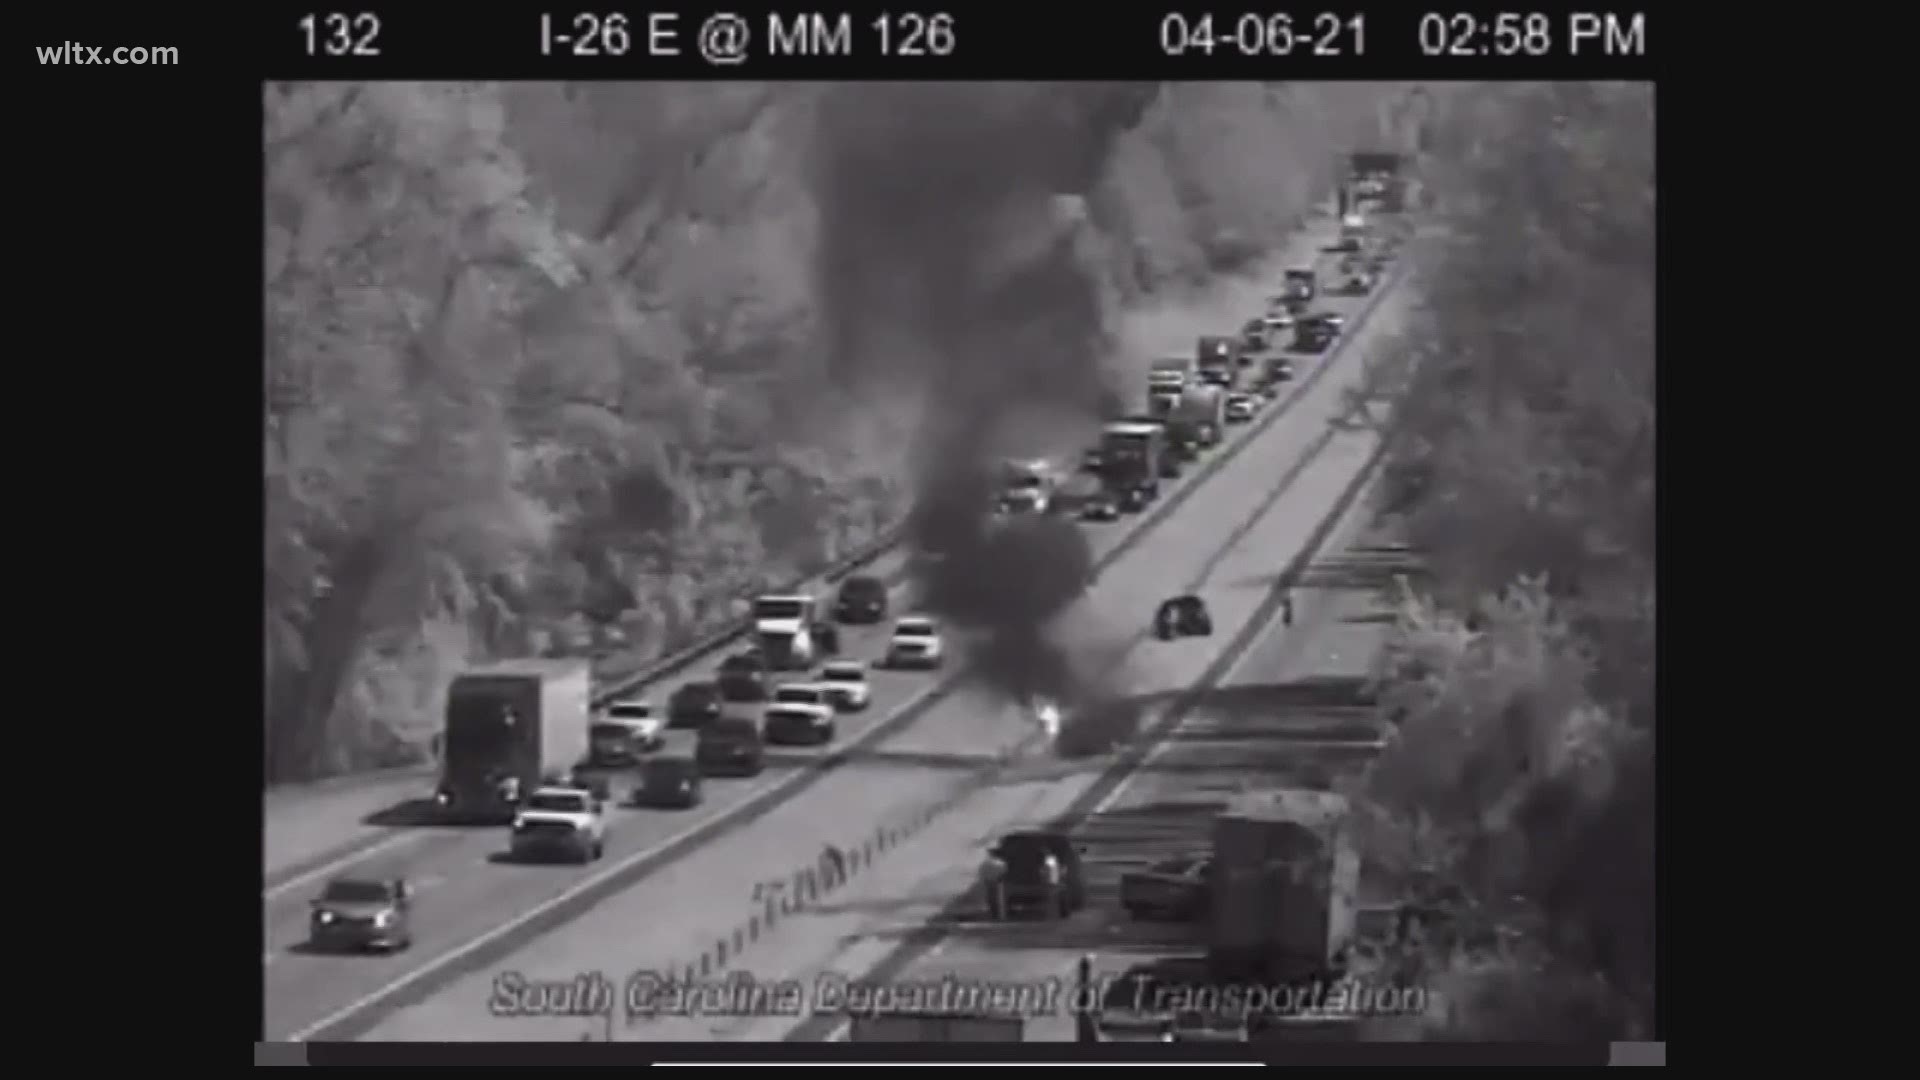 In the latest update, the SCHP reports that eastbound lanes of I-26 near the 126 mile marker are now open.